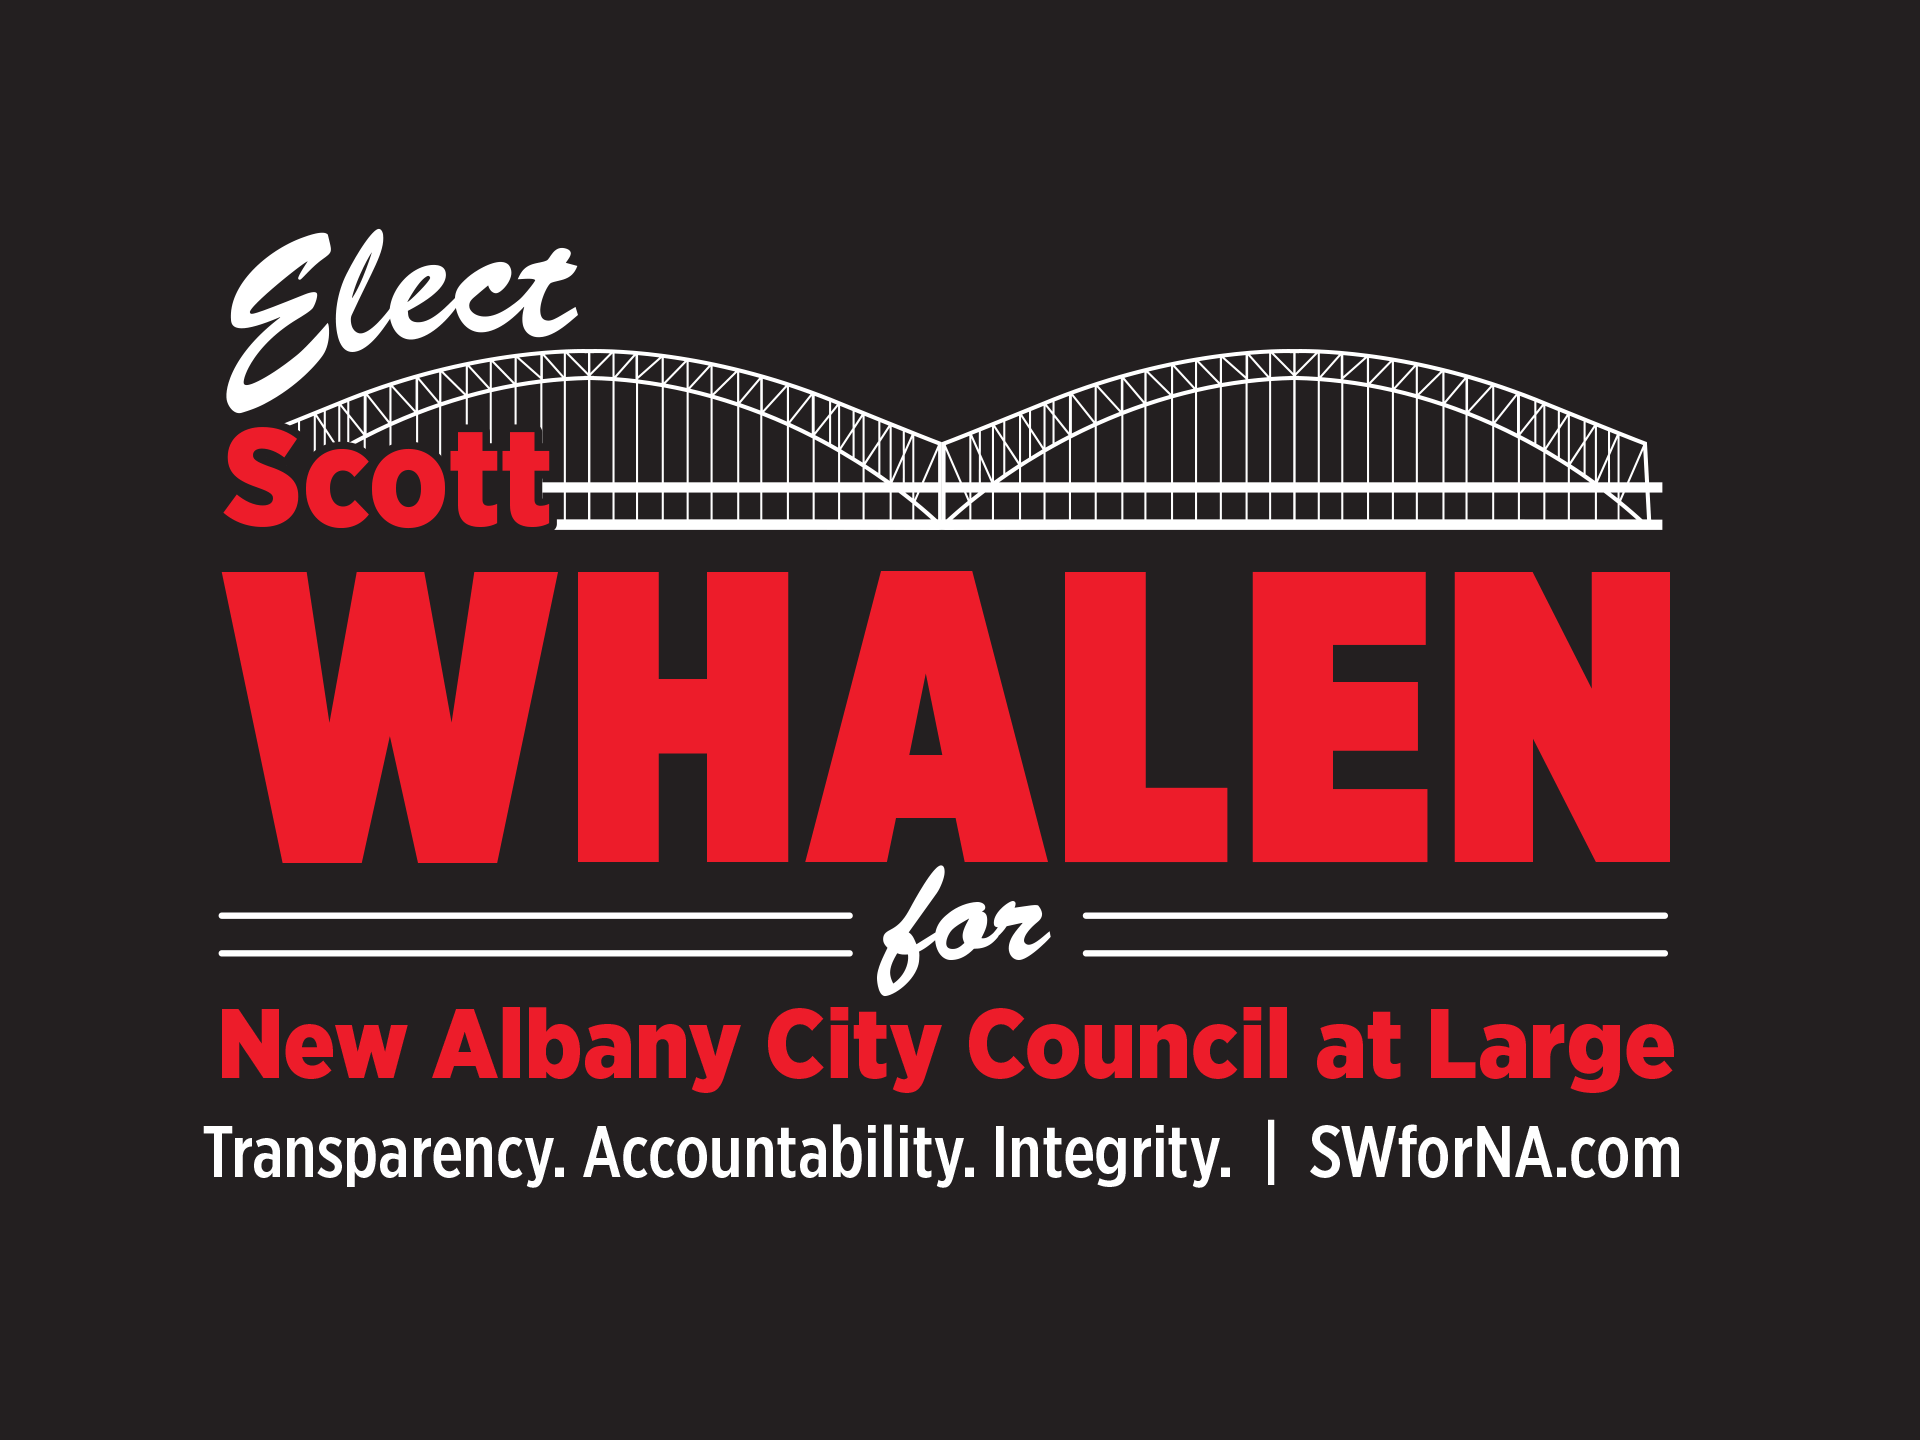 Principles Scott Whalen for New Albany City Council at Large